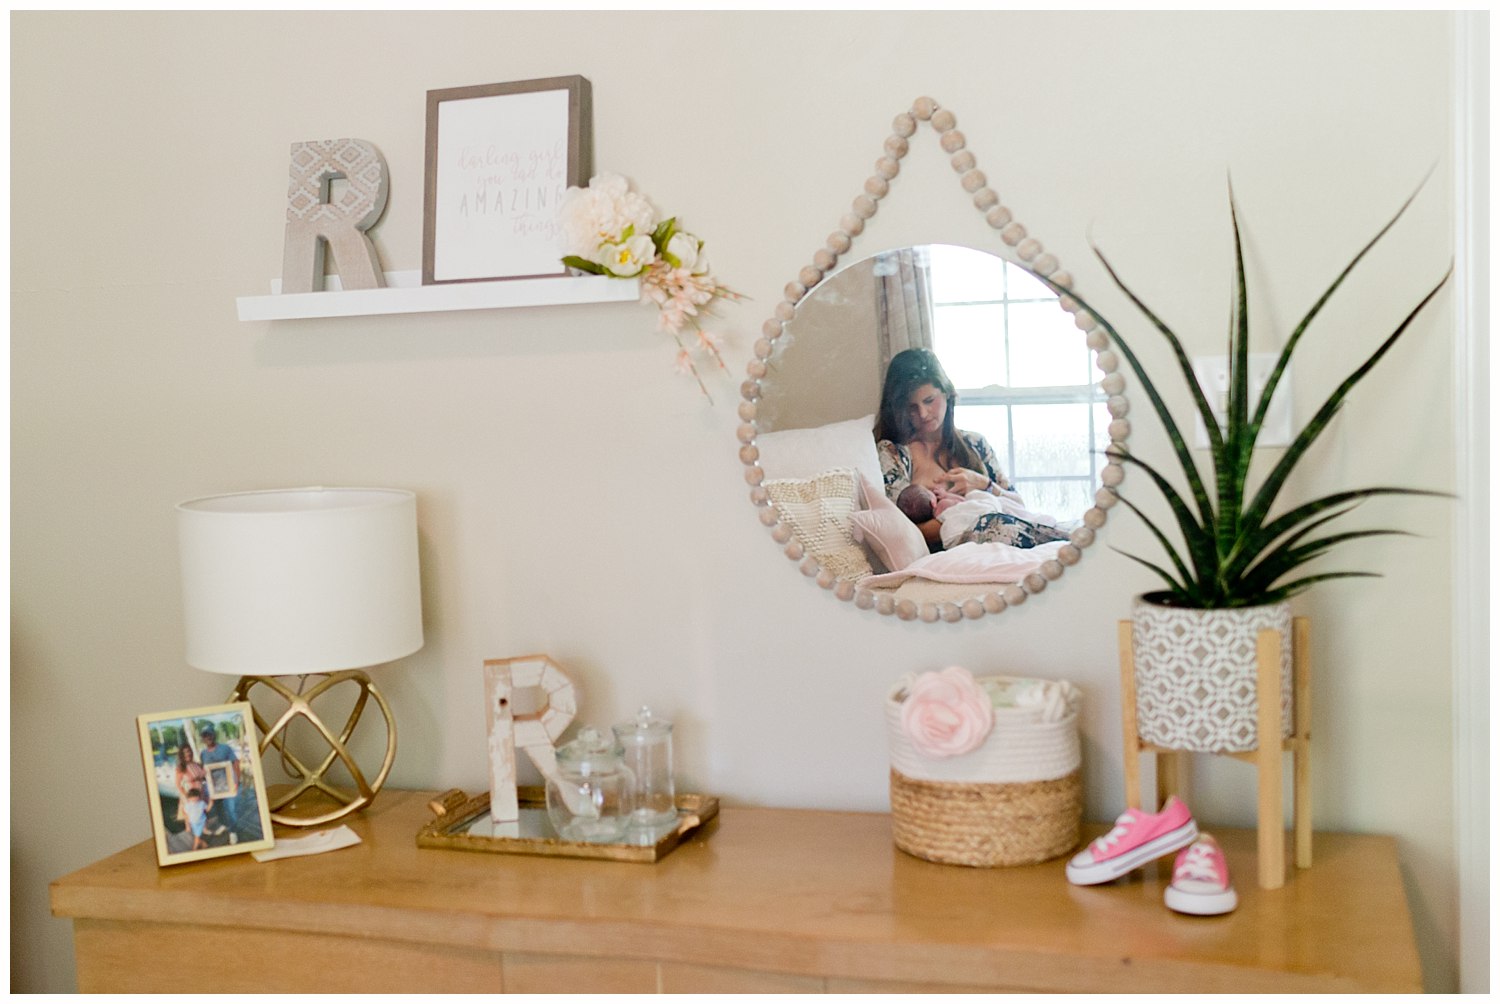 mother nursing baby girl in nursery - mirror reflection with cute decor